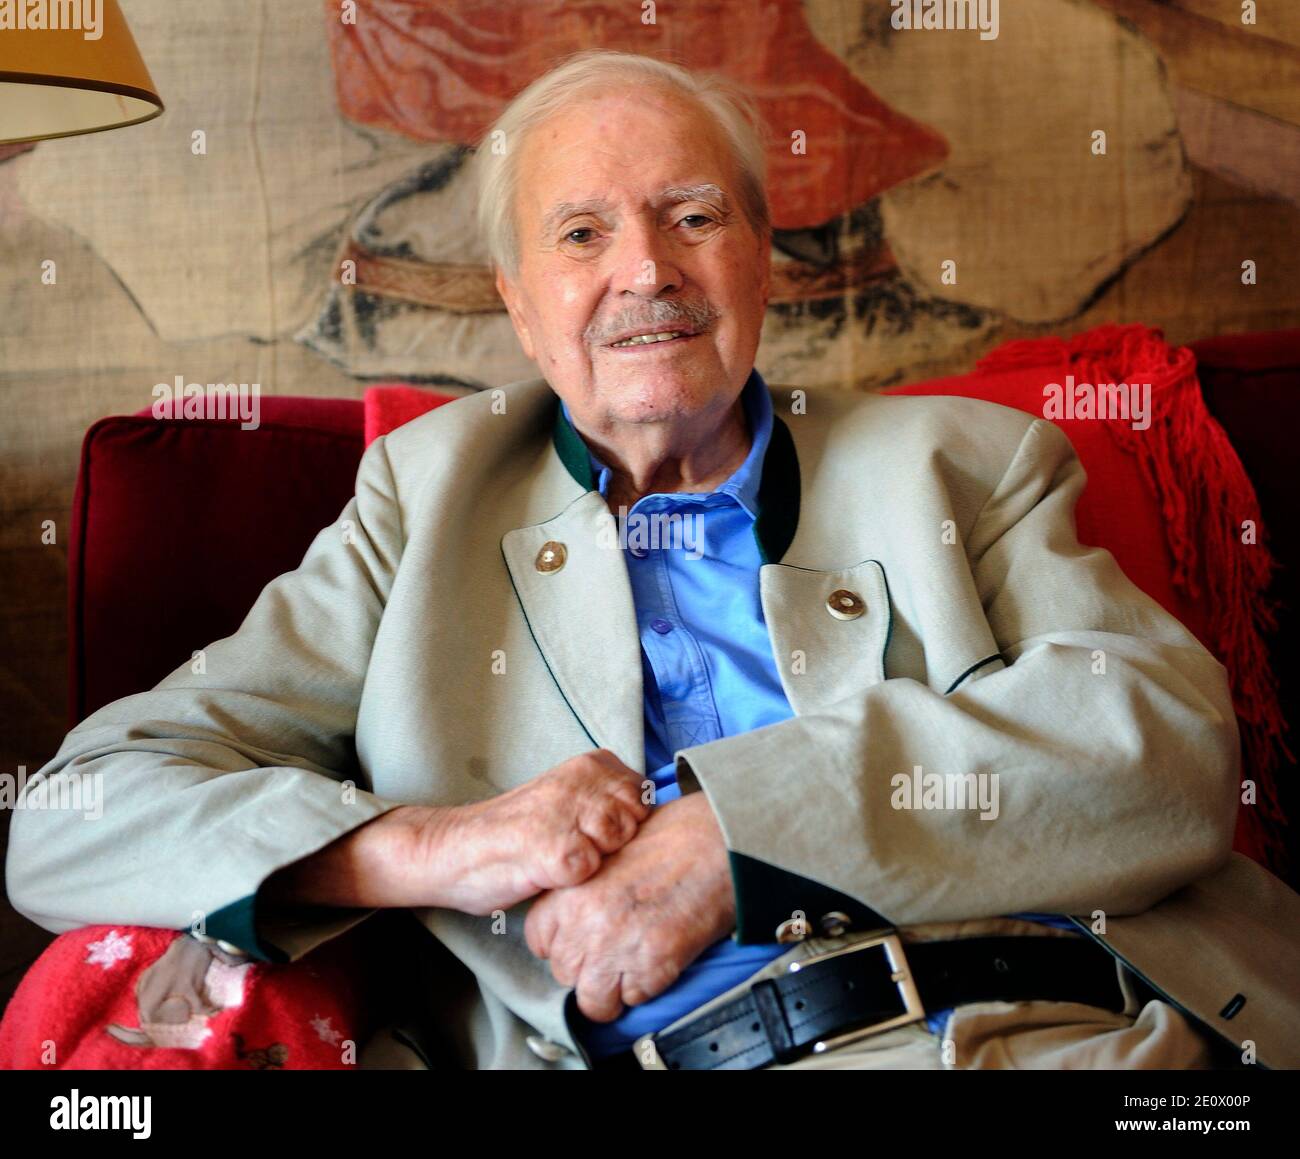 EXCLUSIVE. File photo of Maurice Herzog taken at his home in Neuilly sur Seine near Paris, France on November 19, 2011. Maurice Herzog, the French climber who conquered Annapurna in the first recorded ascent of a peak above 8,000 metres, has died at the age of 93. Photo by Antoine Breard/Exuleo/ABACAPRESS.COM Stock Photo